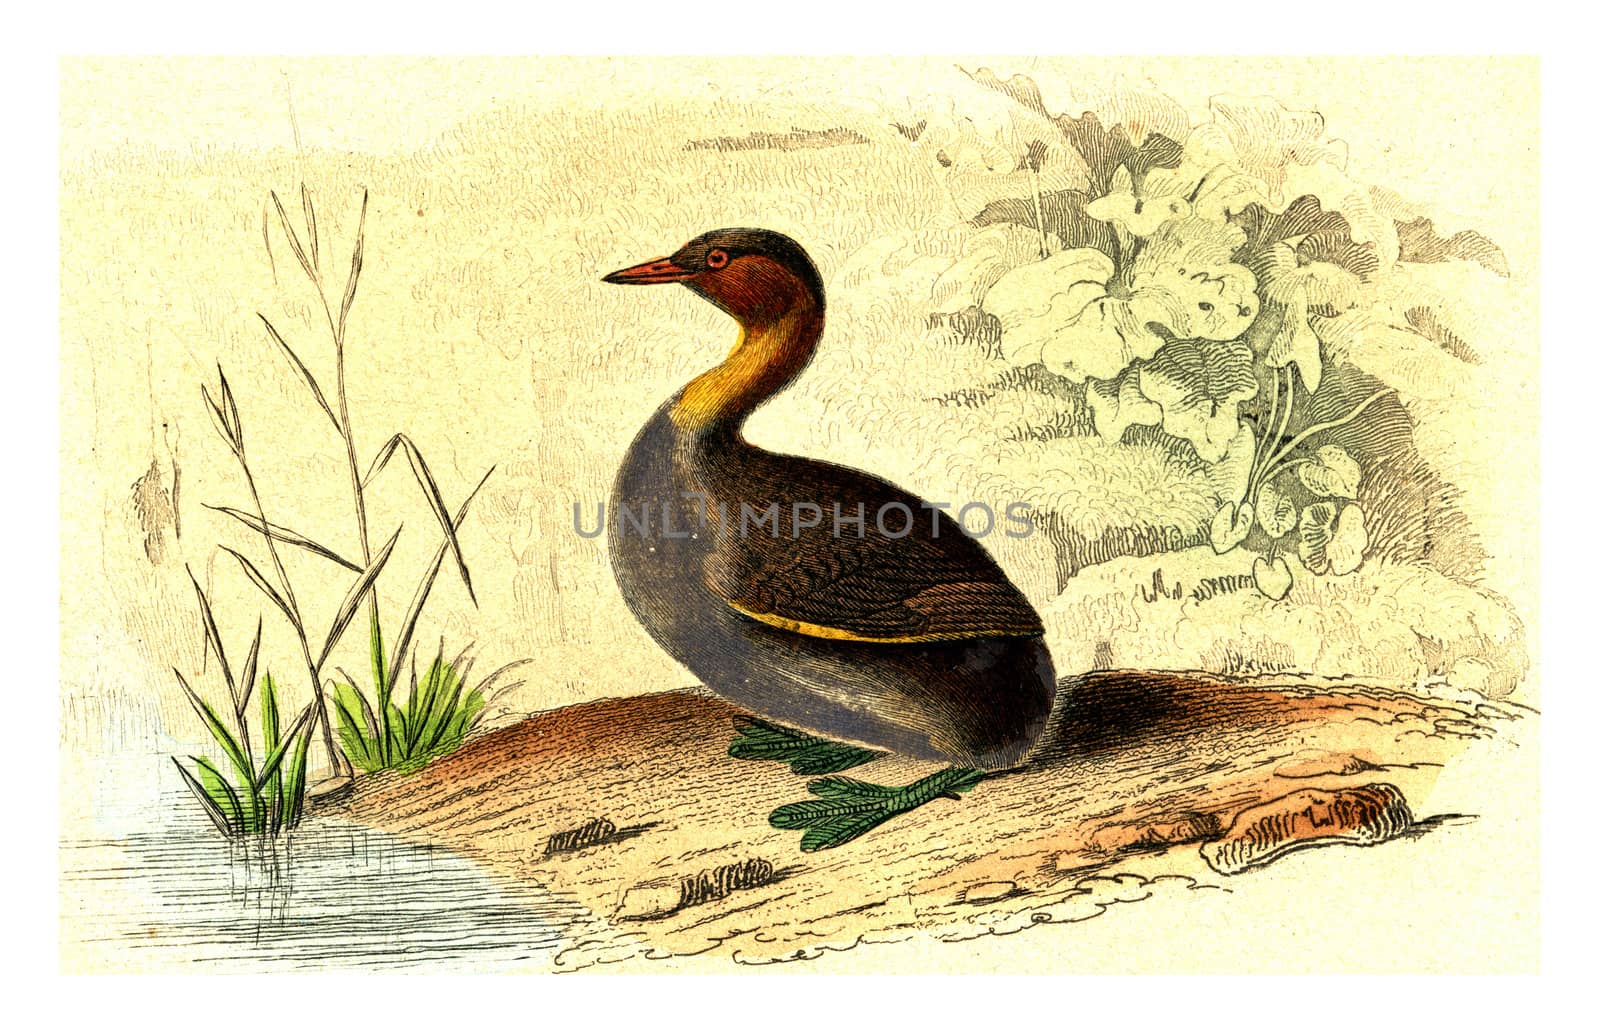 The grebe, vintage engraved illustration. From Buffon Complete Work.
